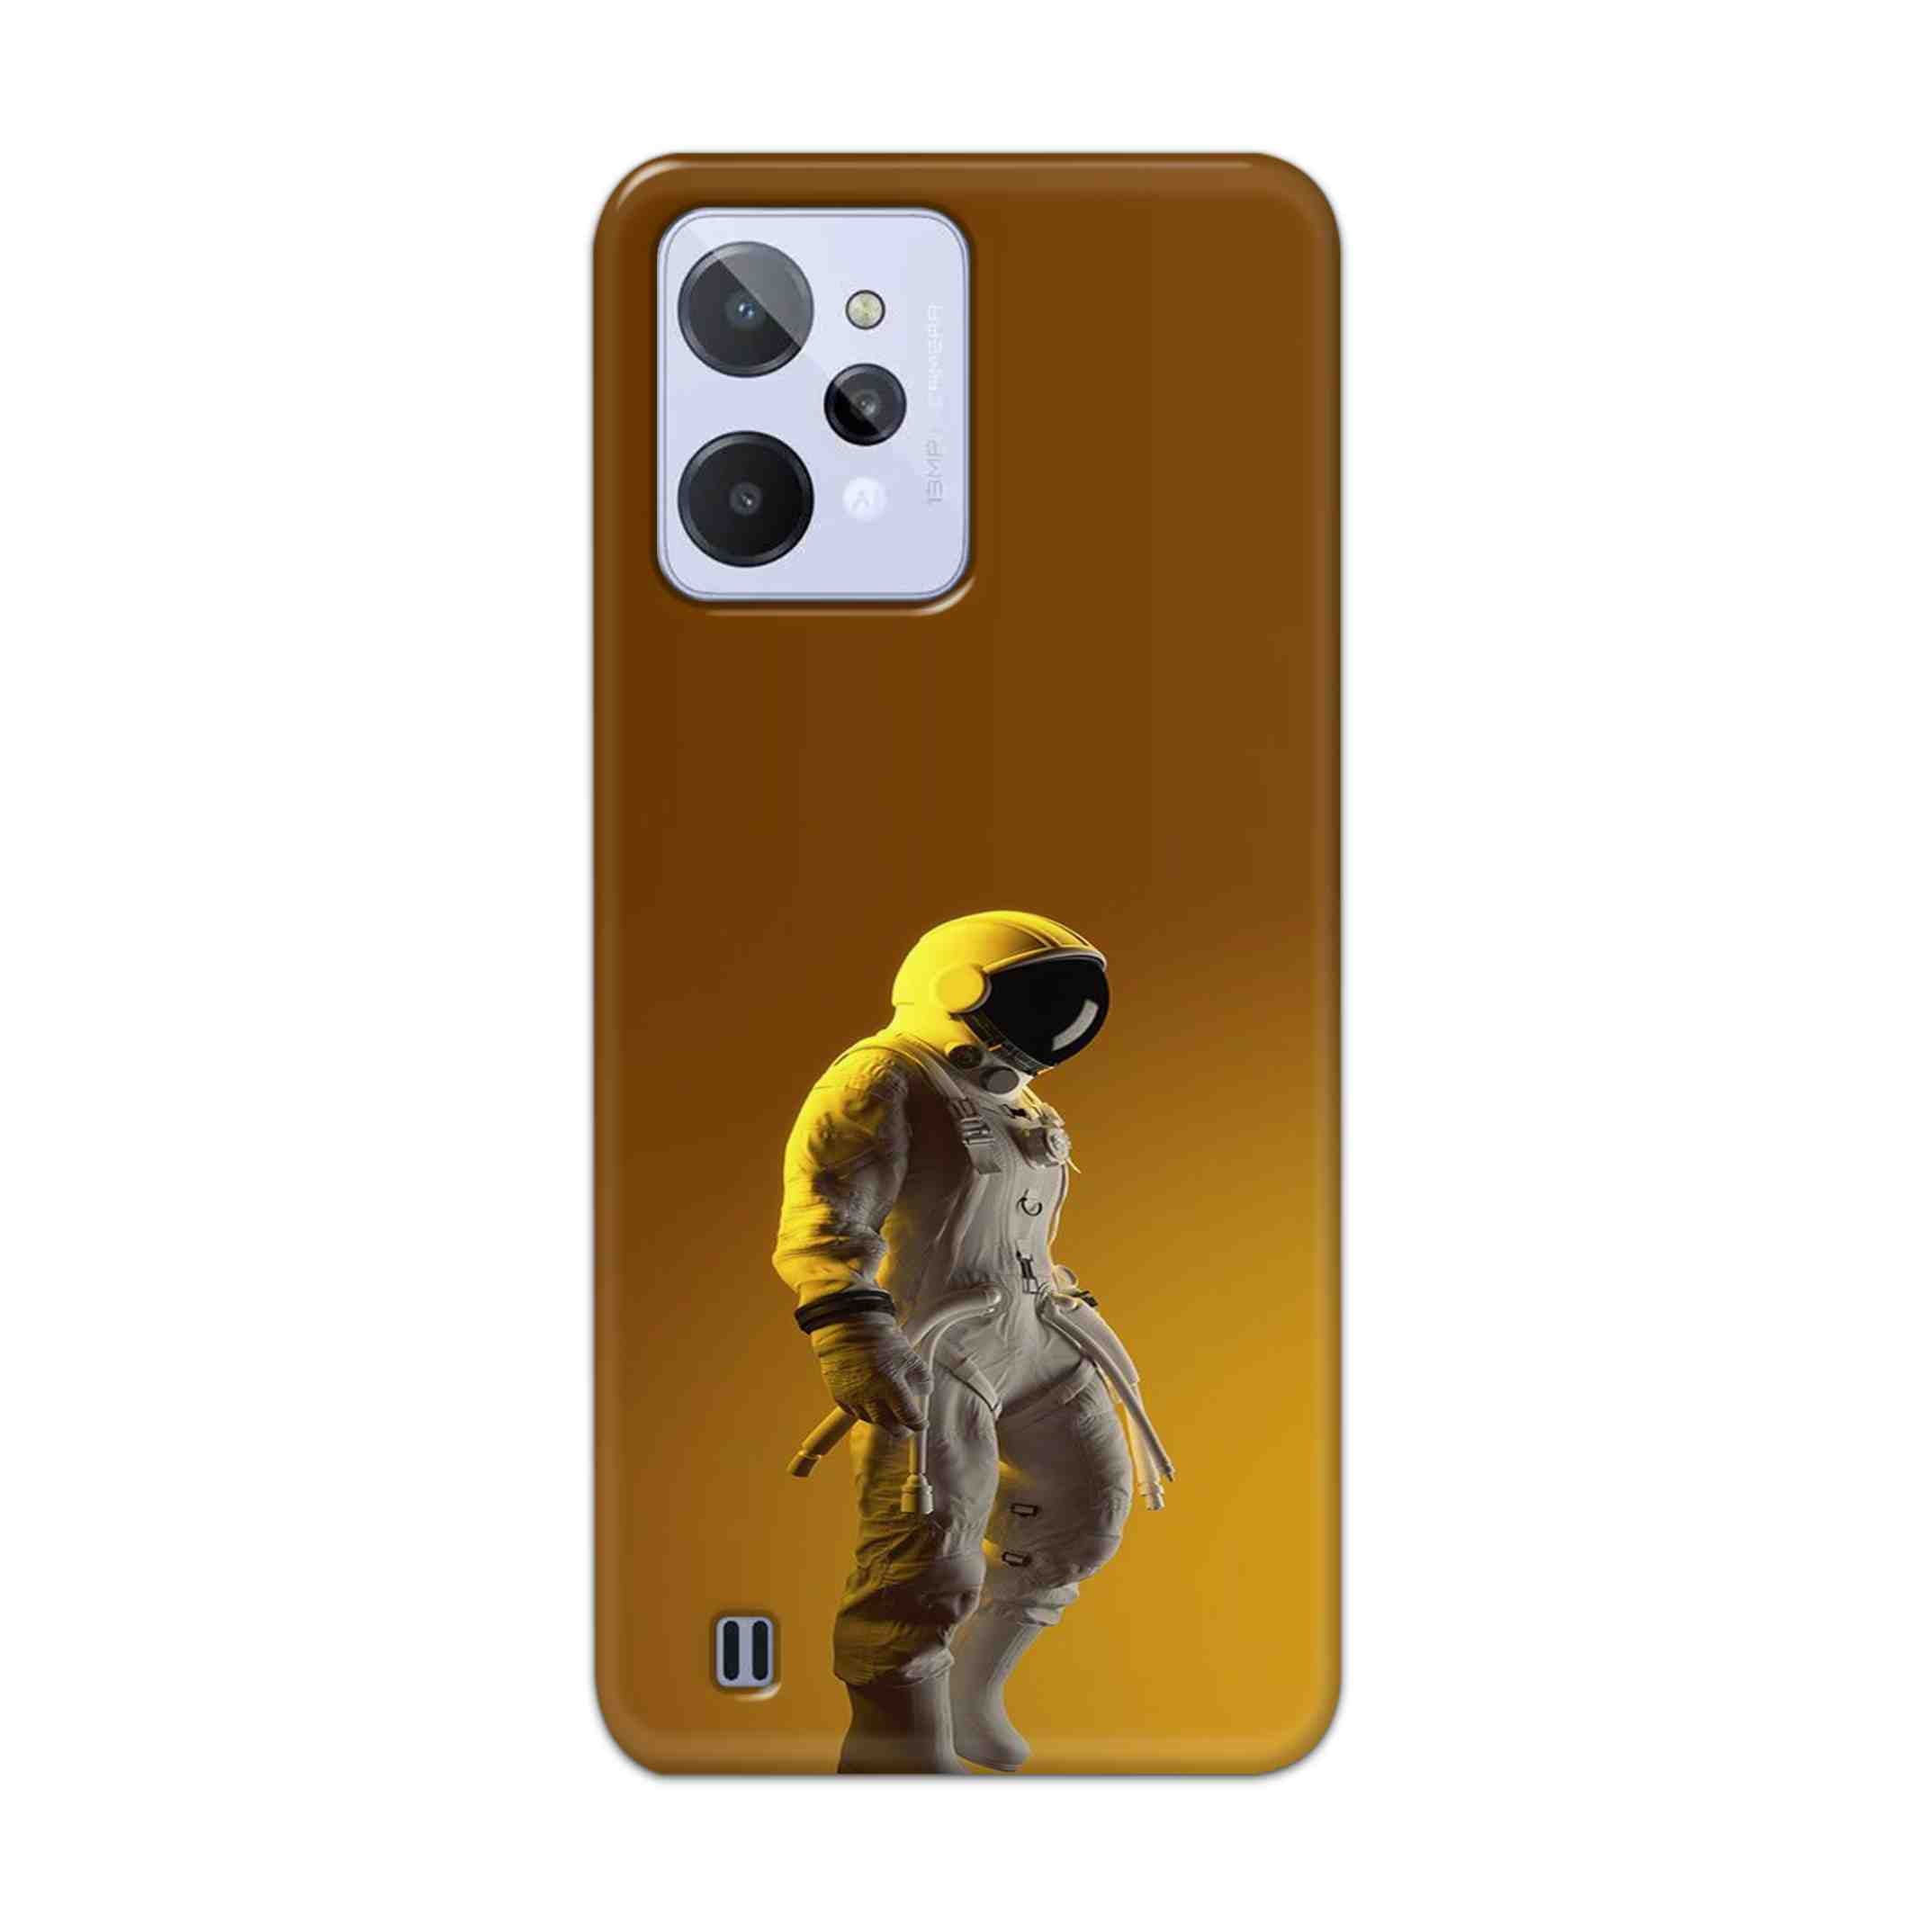 Buy Yellow Astronaut Hard Back Mobile Phone Case Cover For Realme C31 Online